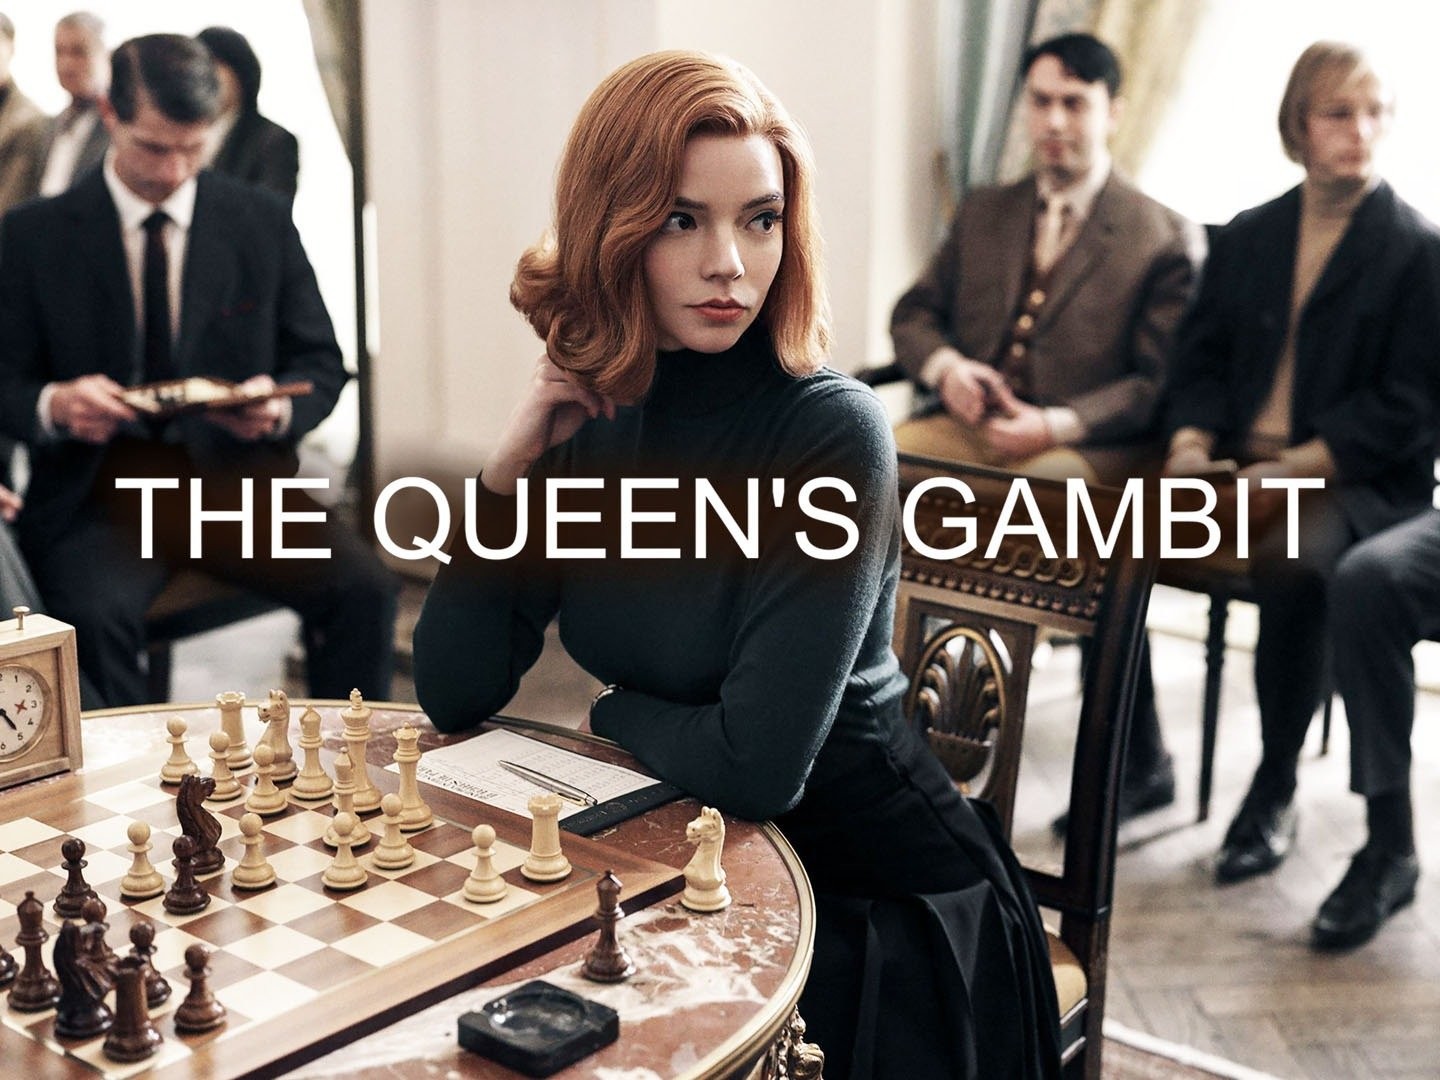 The Queen's Gambit Limited Series Teaser, 'Date Announcement